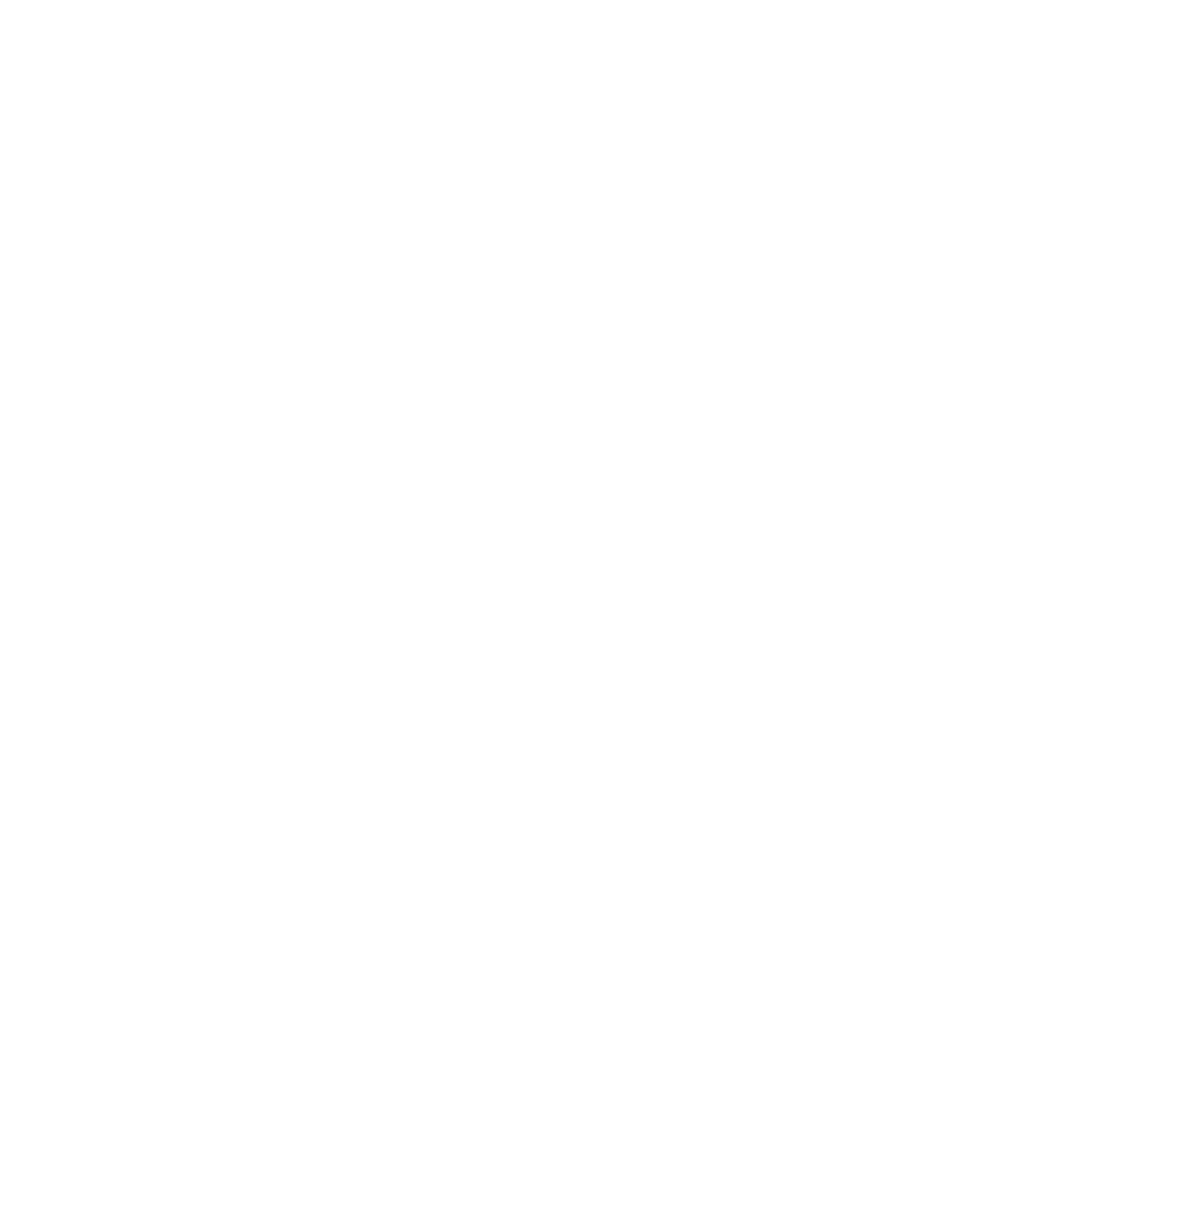 A Black And White Image Of Musical Notes